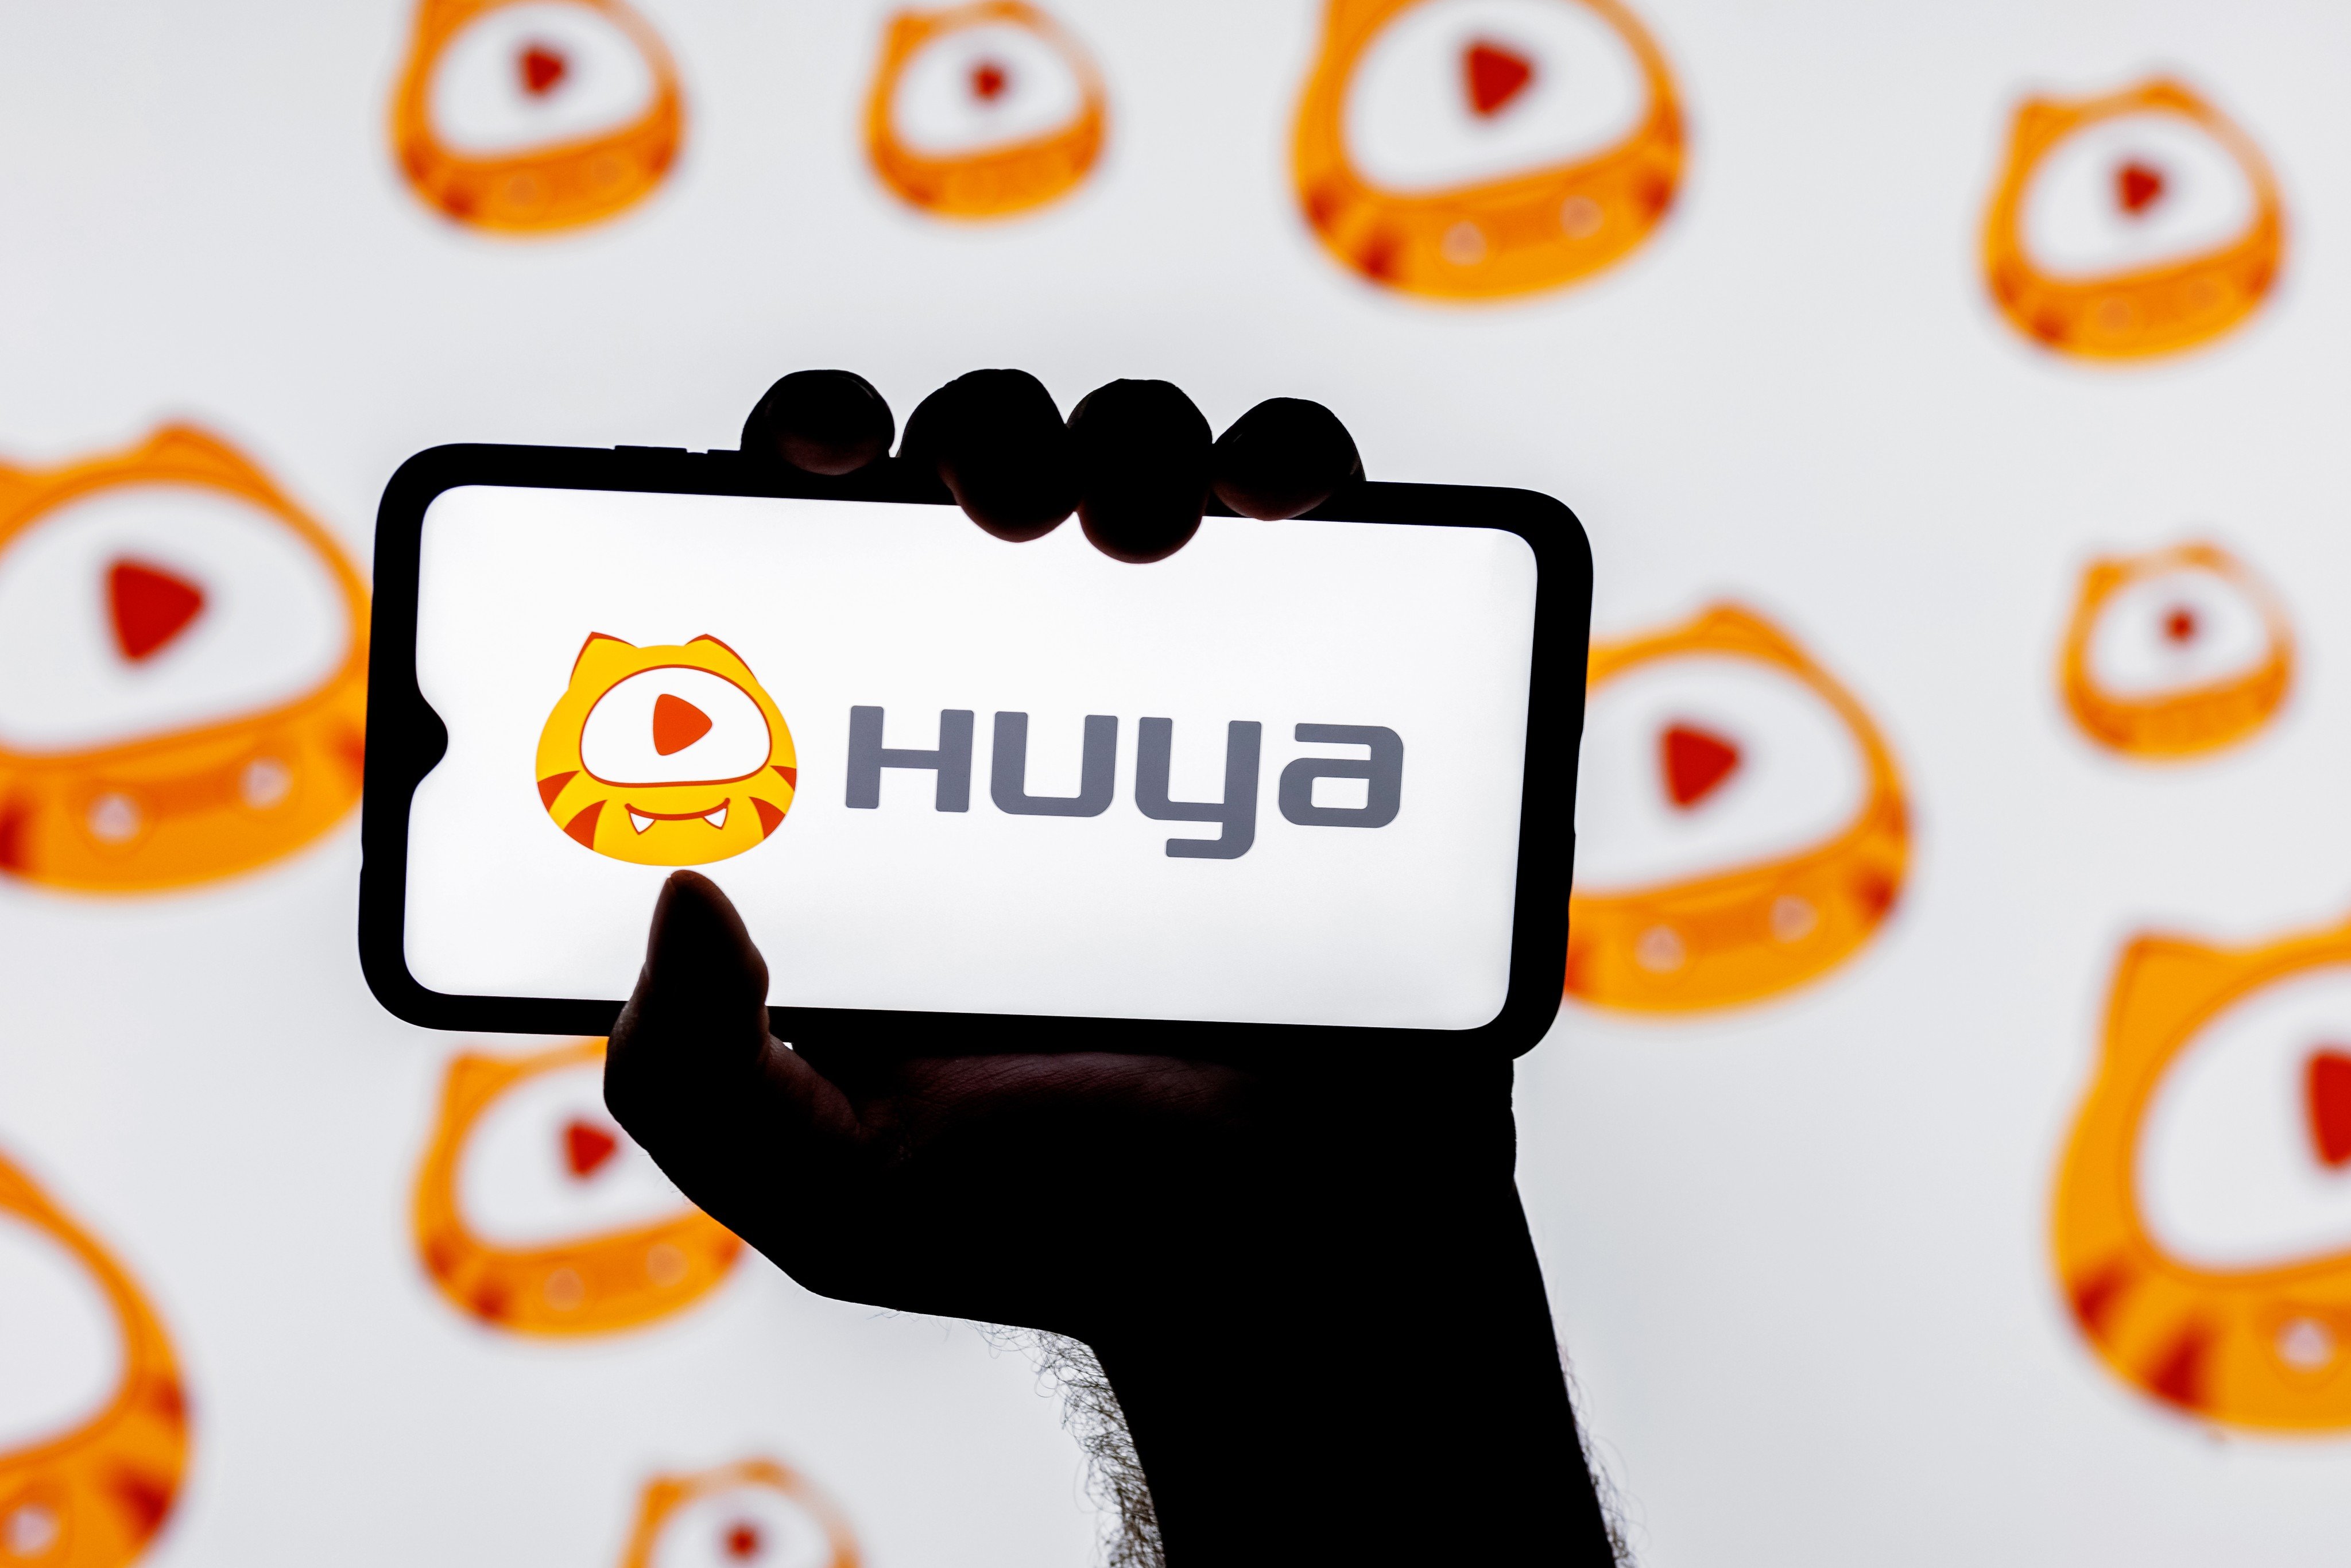 Despite rising competition in China, video game live-streaming platform Huya has been on a spending spree to obtain the rights to broadcast major esports tournaments, including those based on League of Legends and Honour of Kings. Photo: Shutterstock